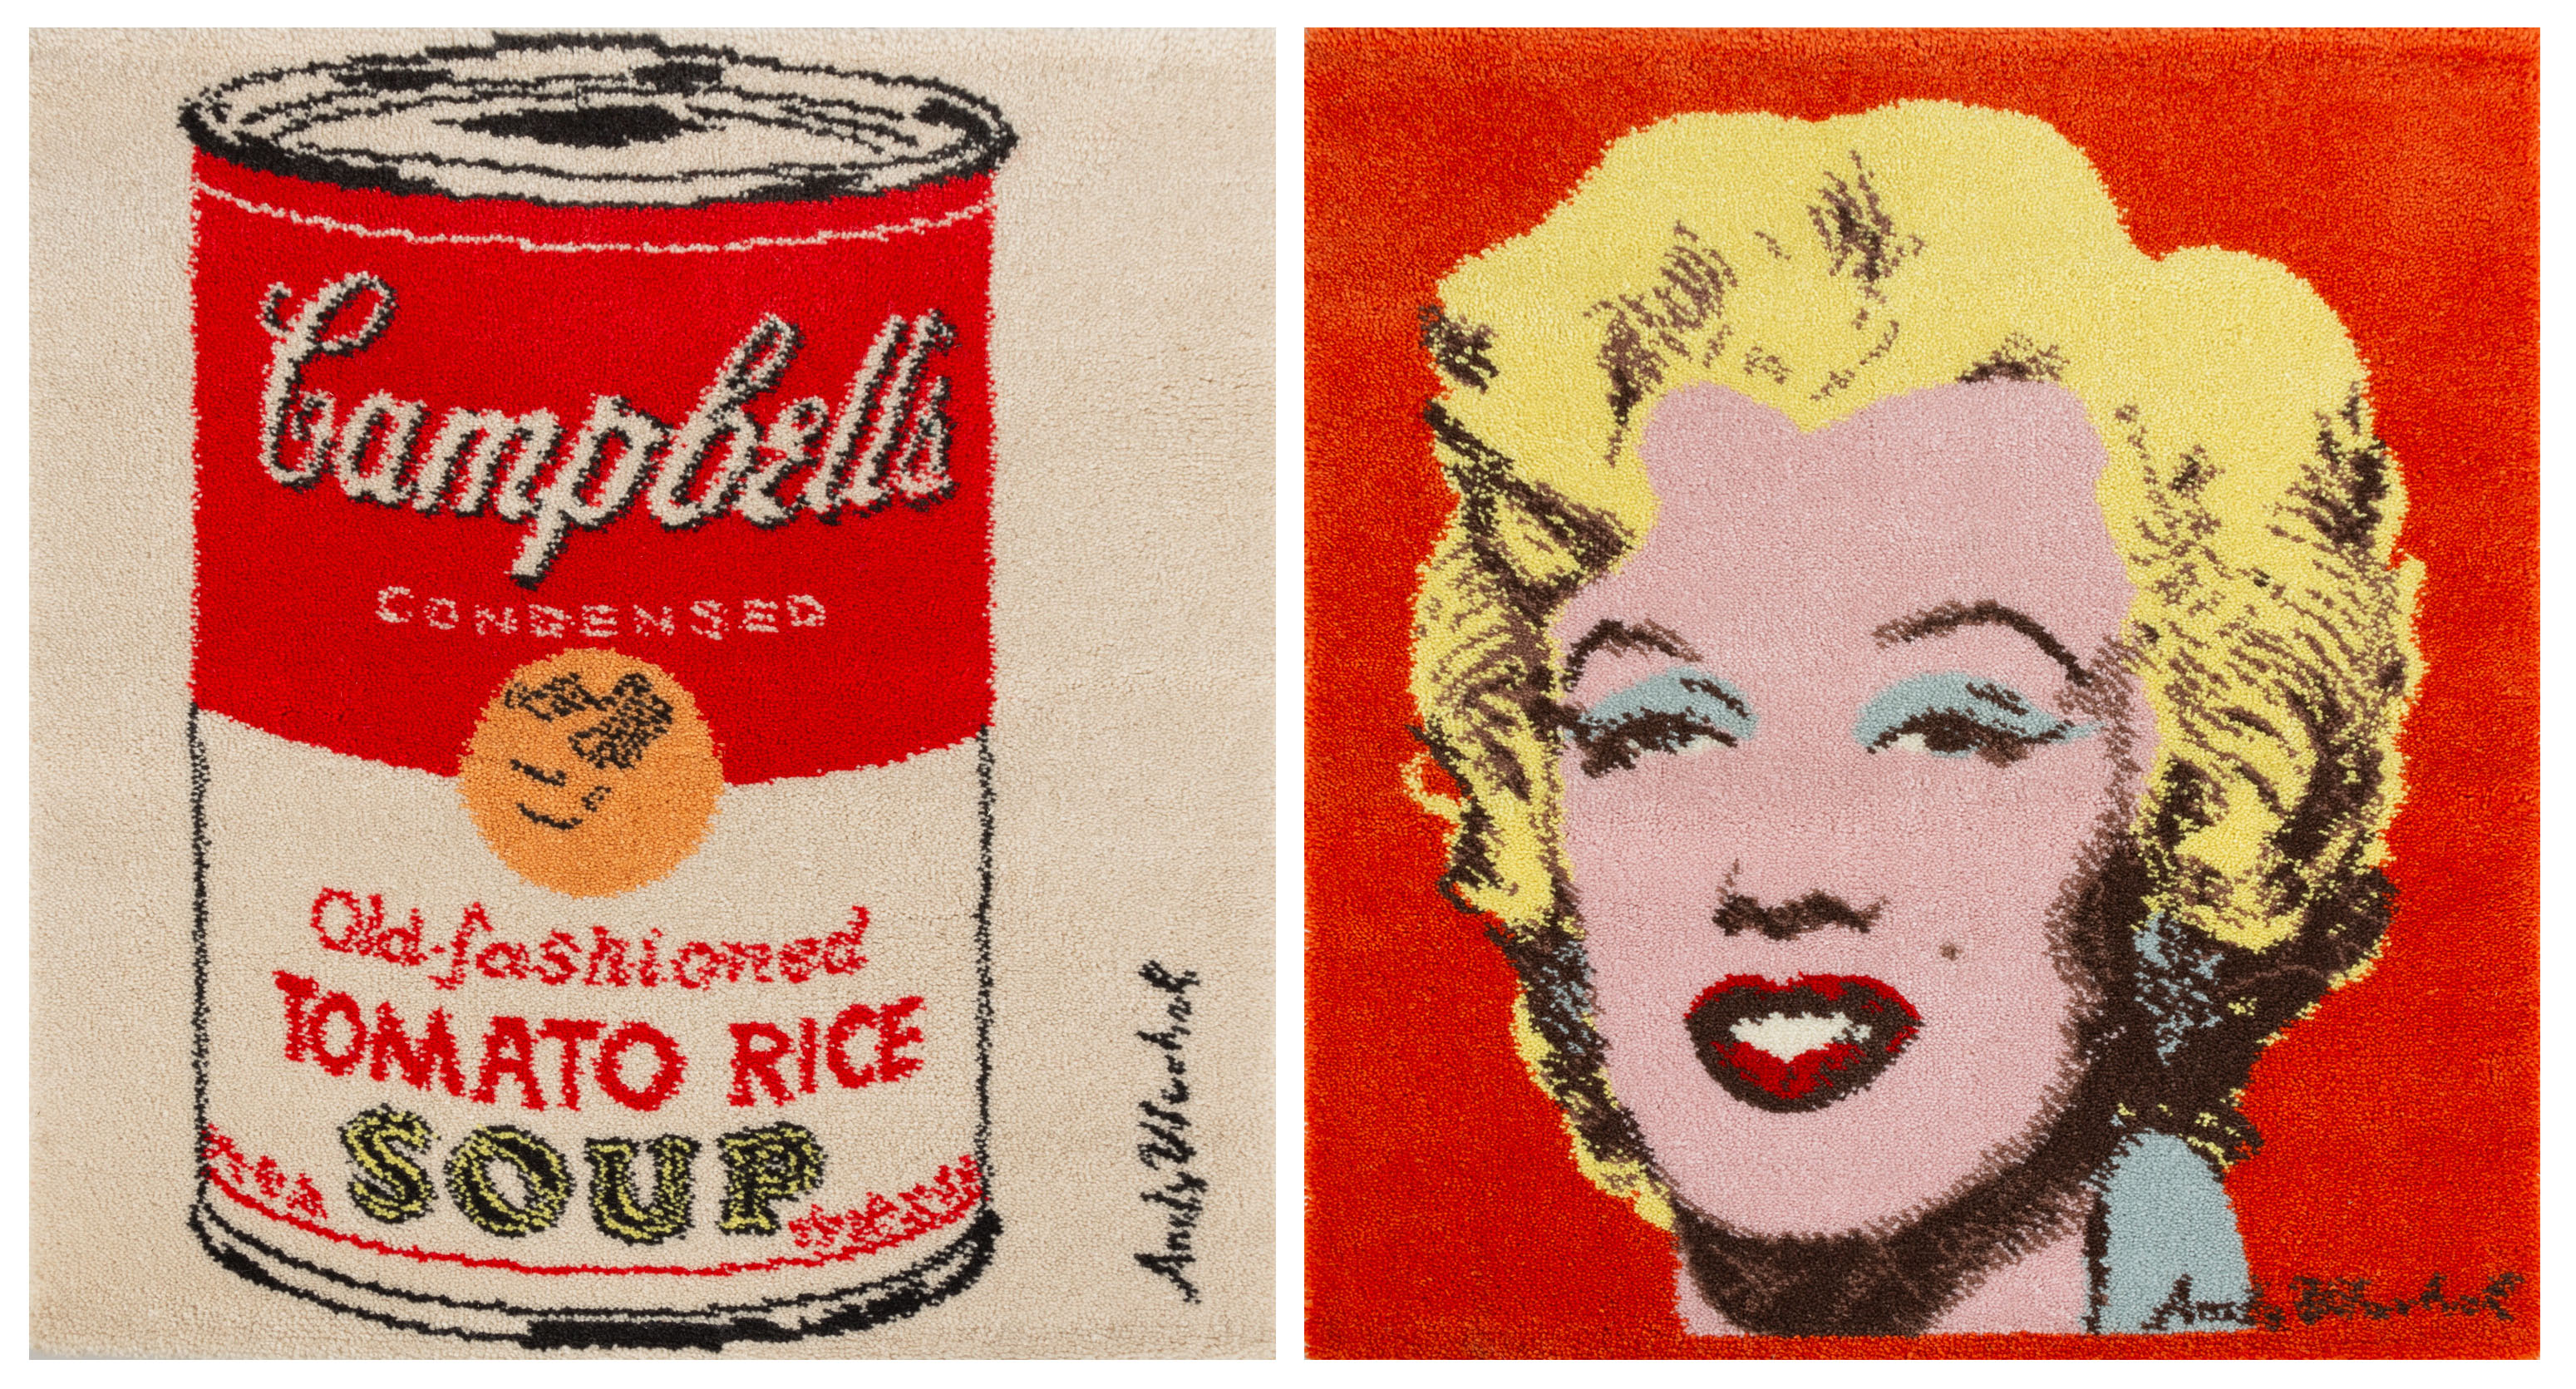 ANDY WARHOL (1928-1987) FOR EGE